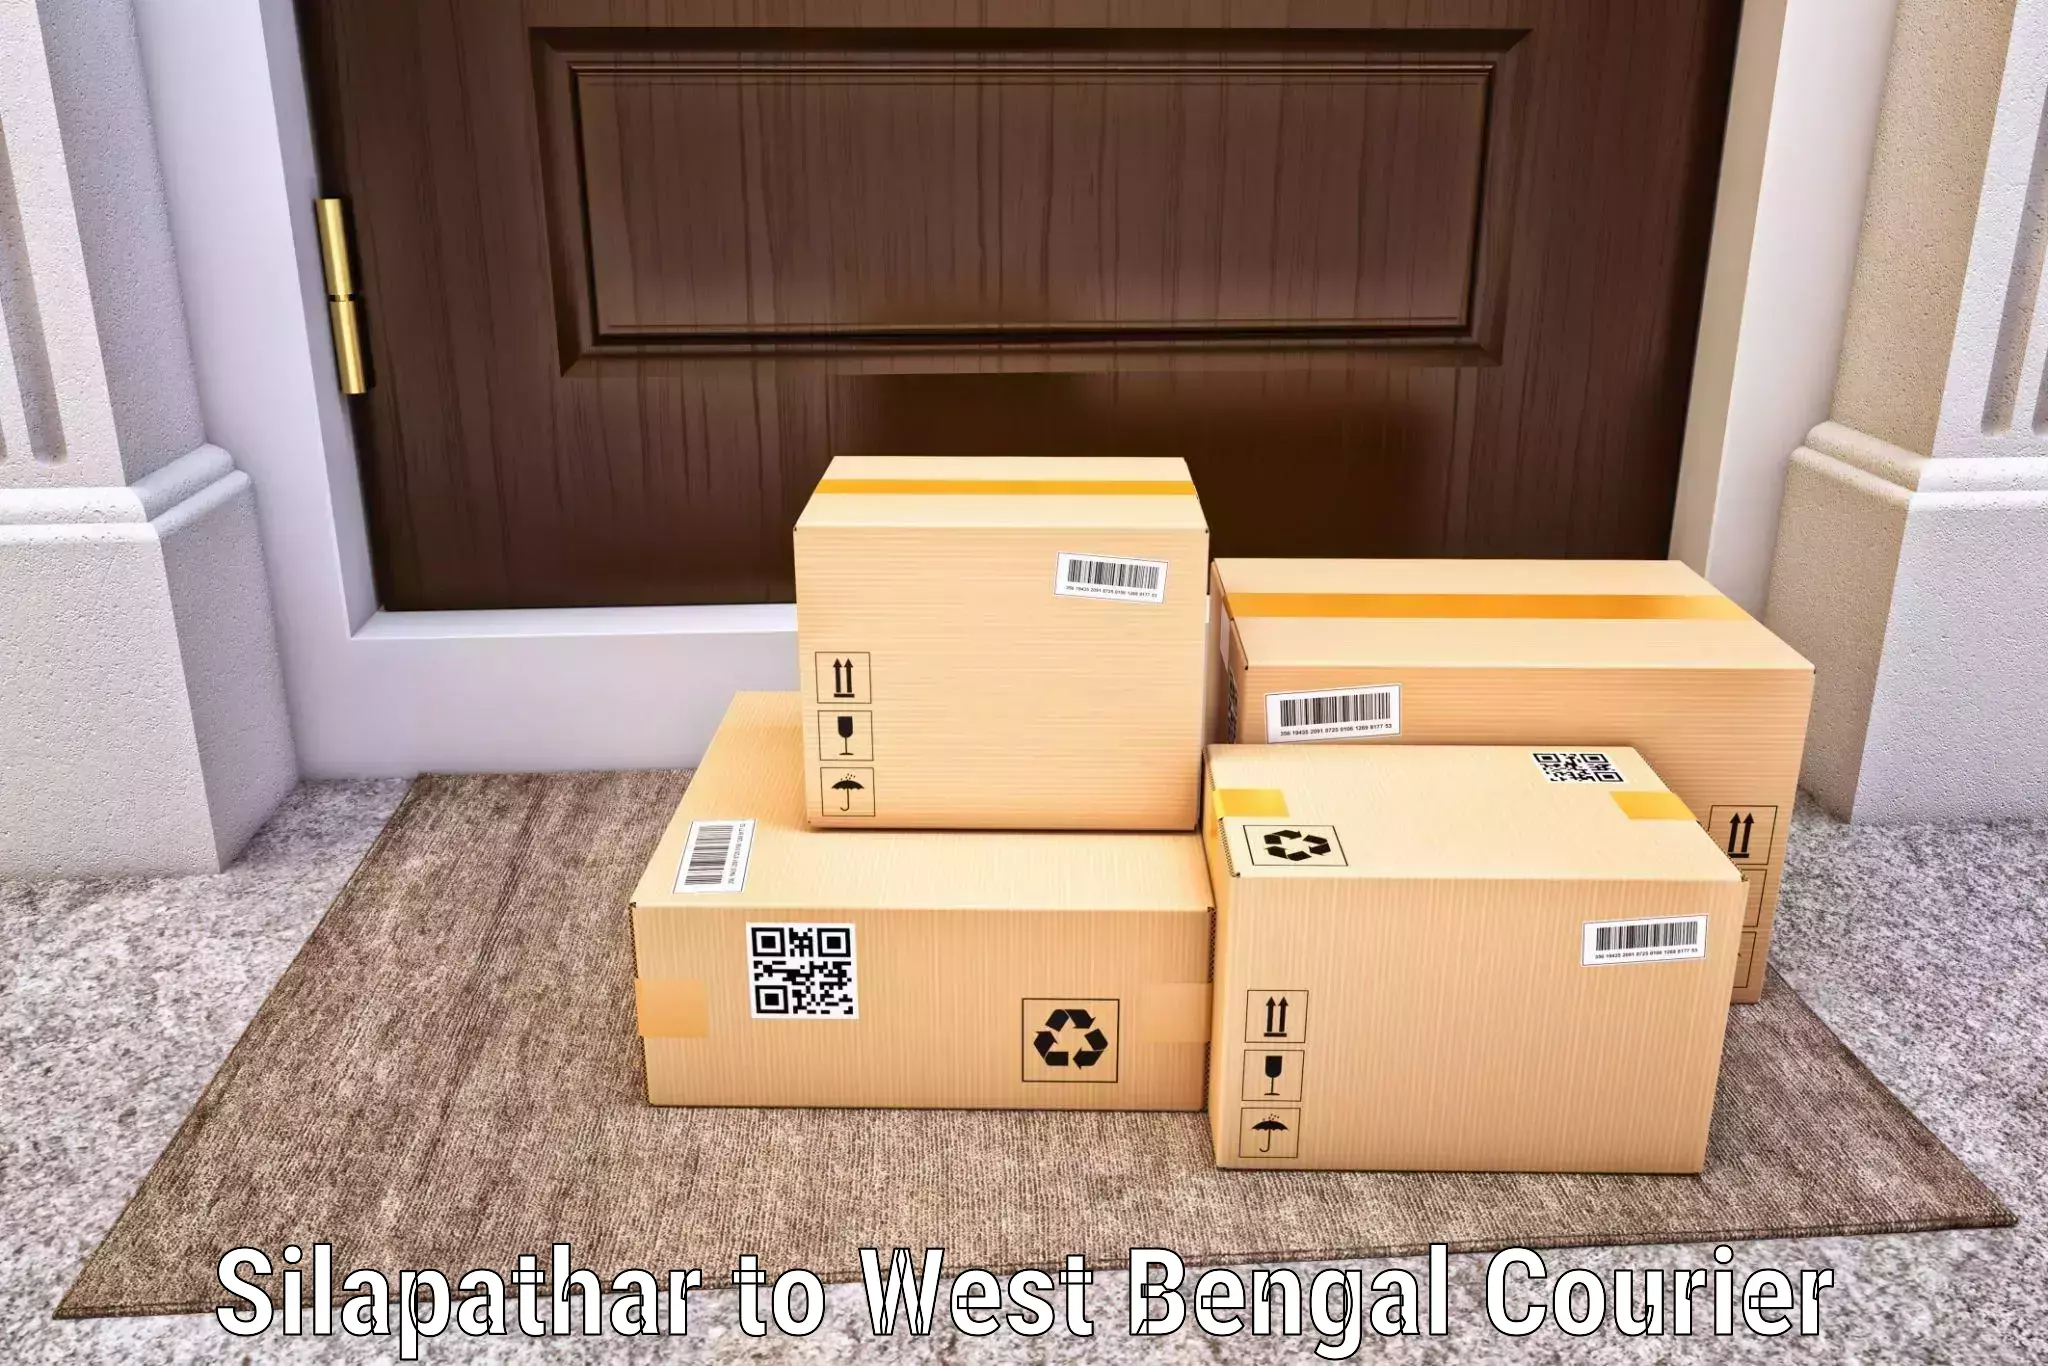 Enhanced shipping experience Silapathar to West Bengal